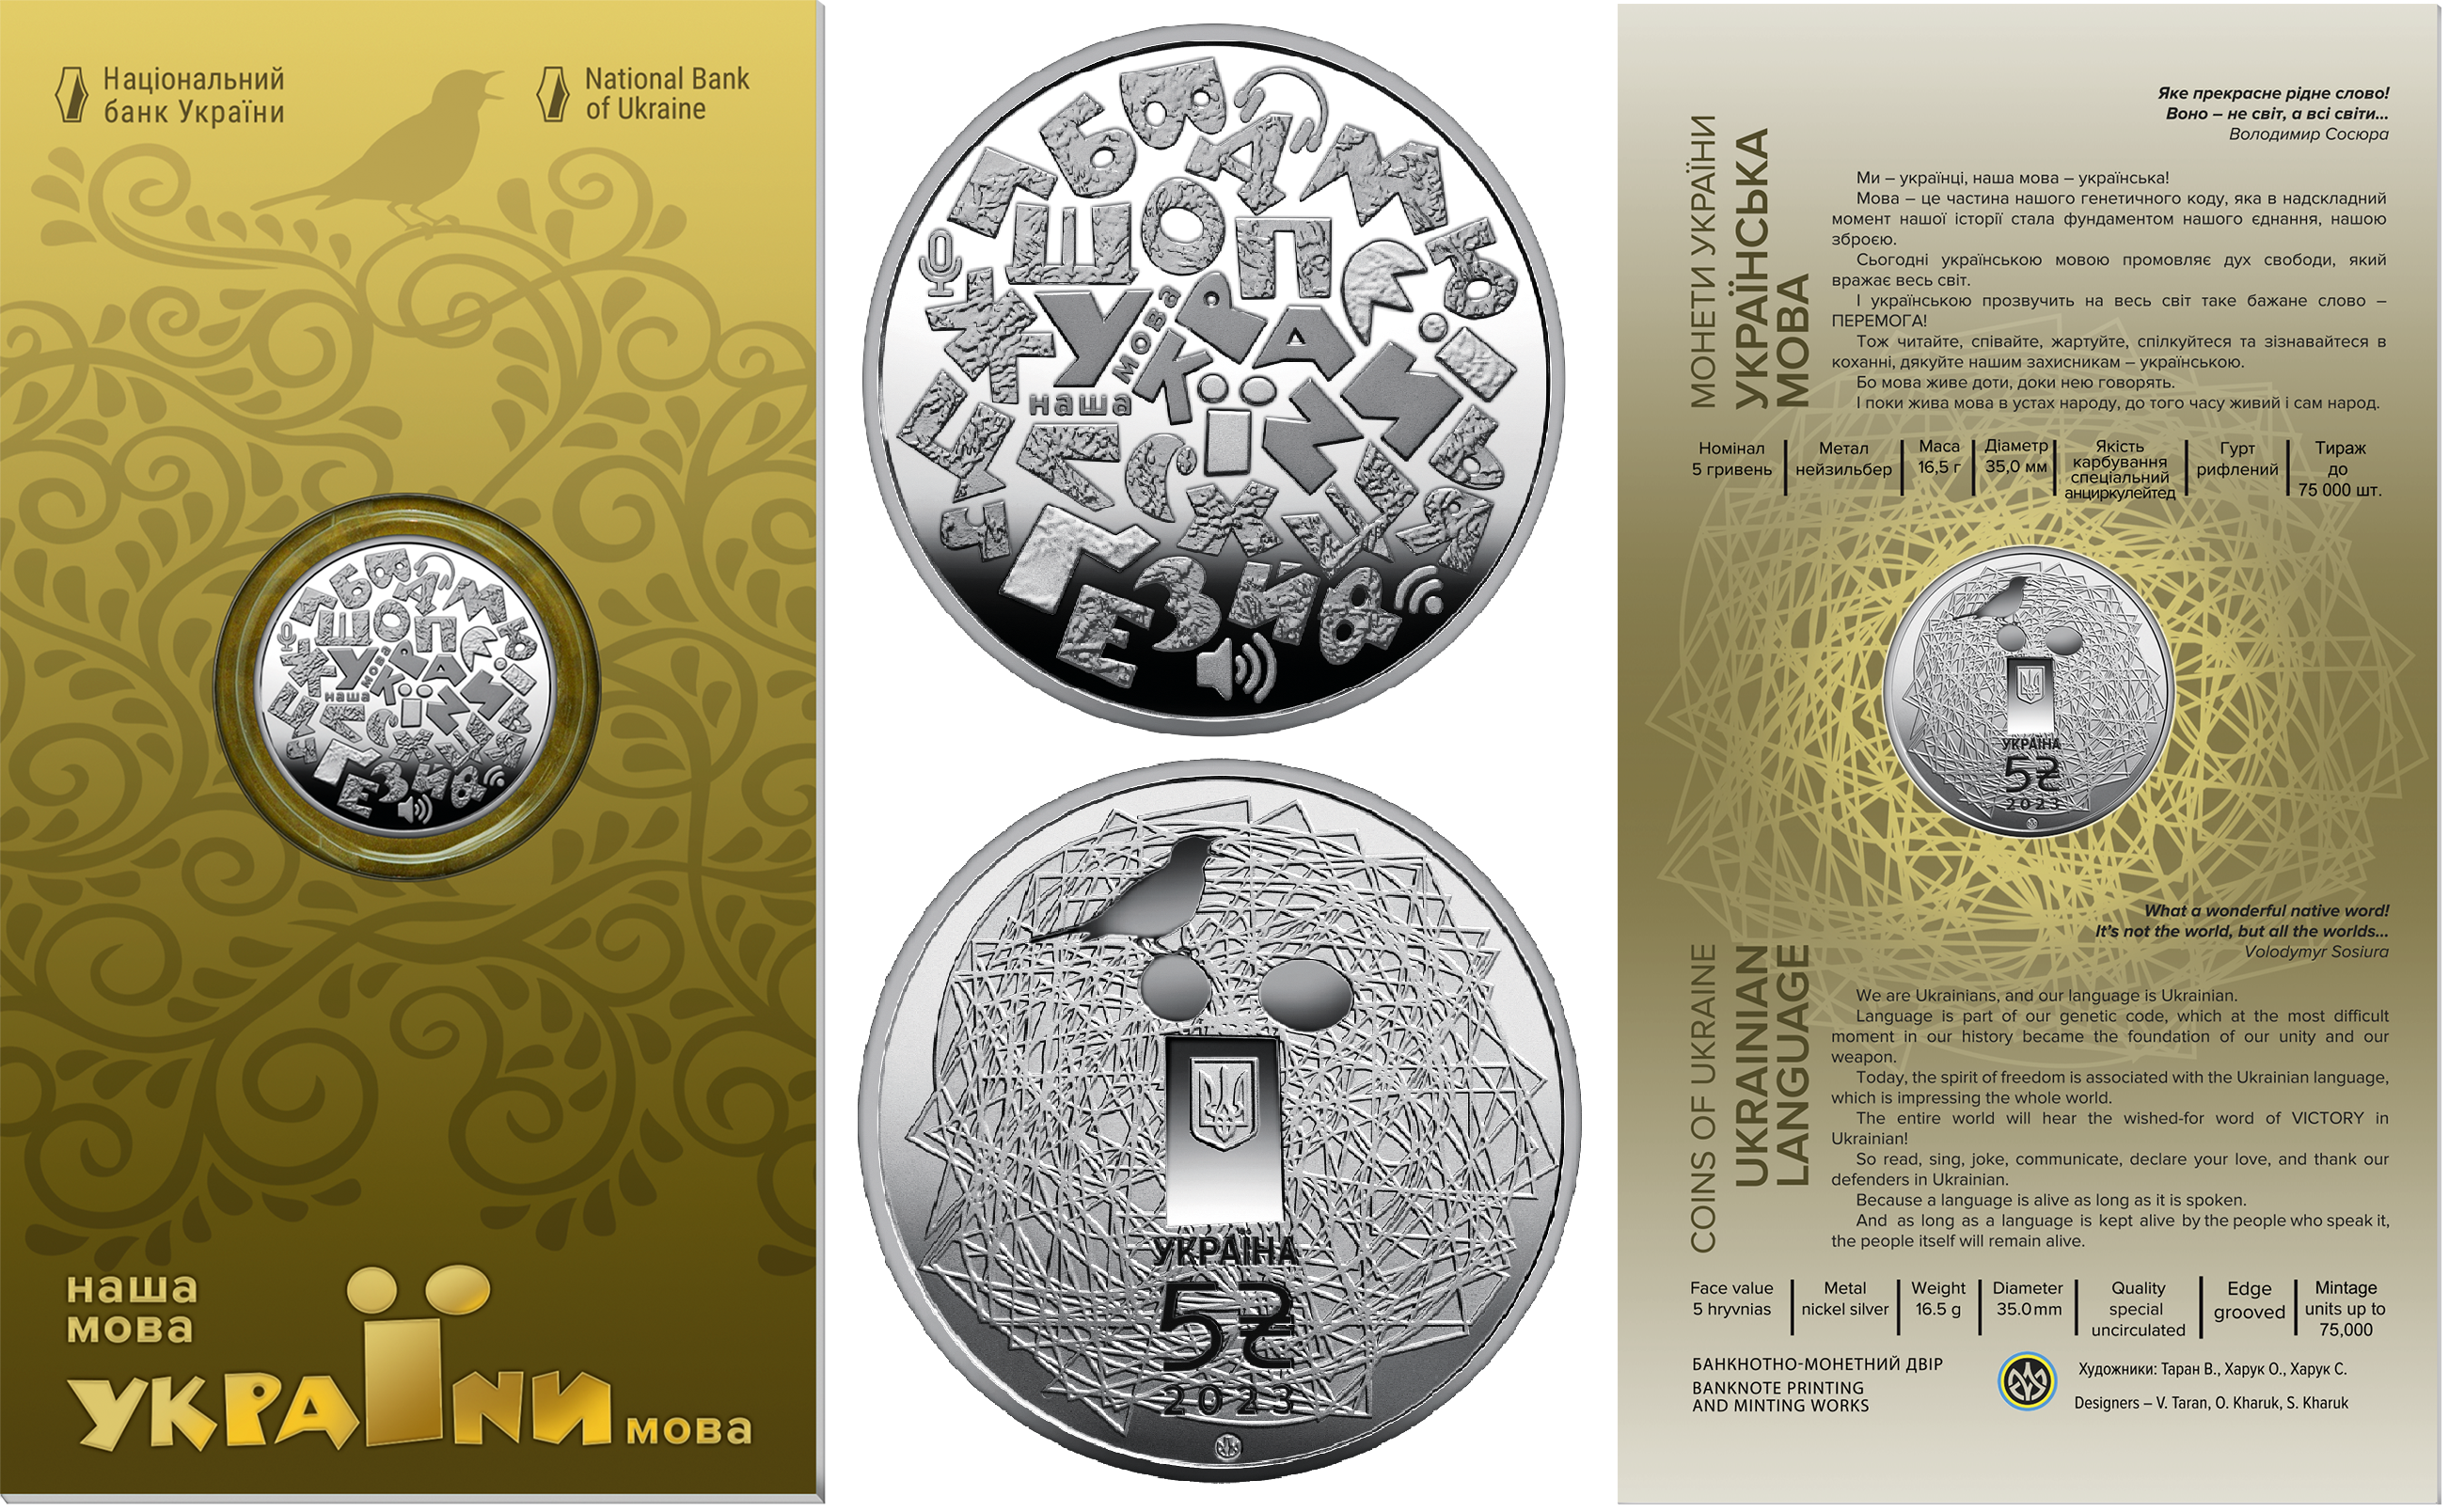 Sale of commemorative coins from MTB BANK • buy commemorative coins in Ukraine at MTB BANK - photo 4 - mtb.ua